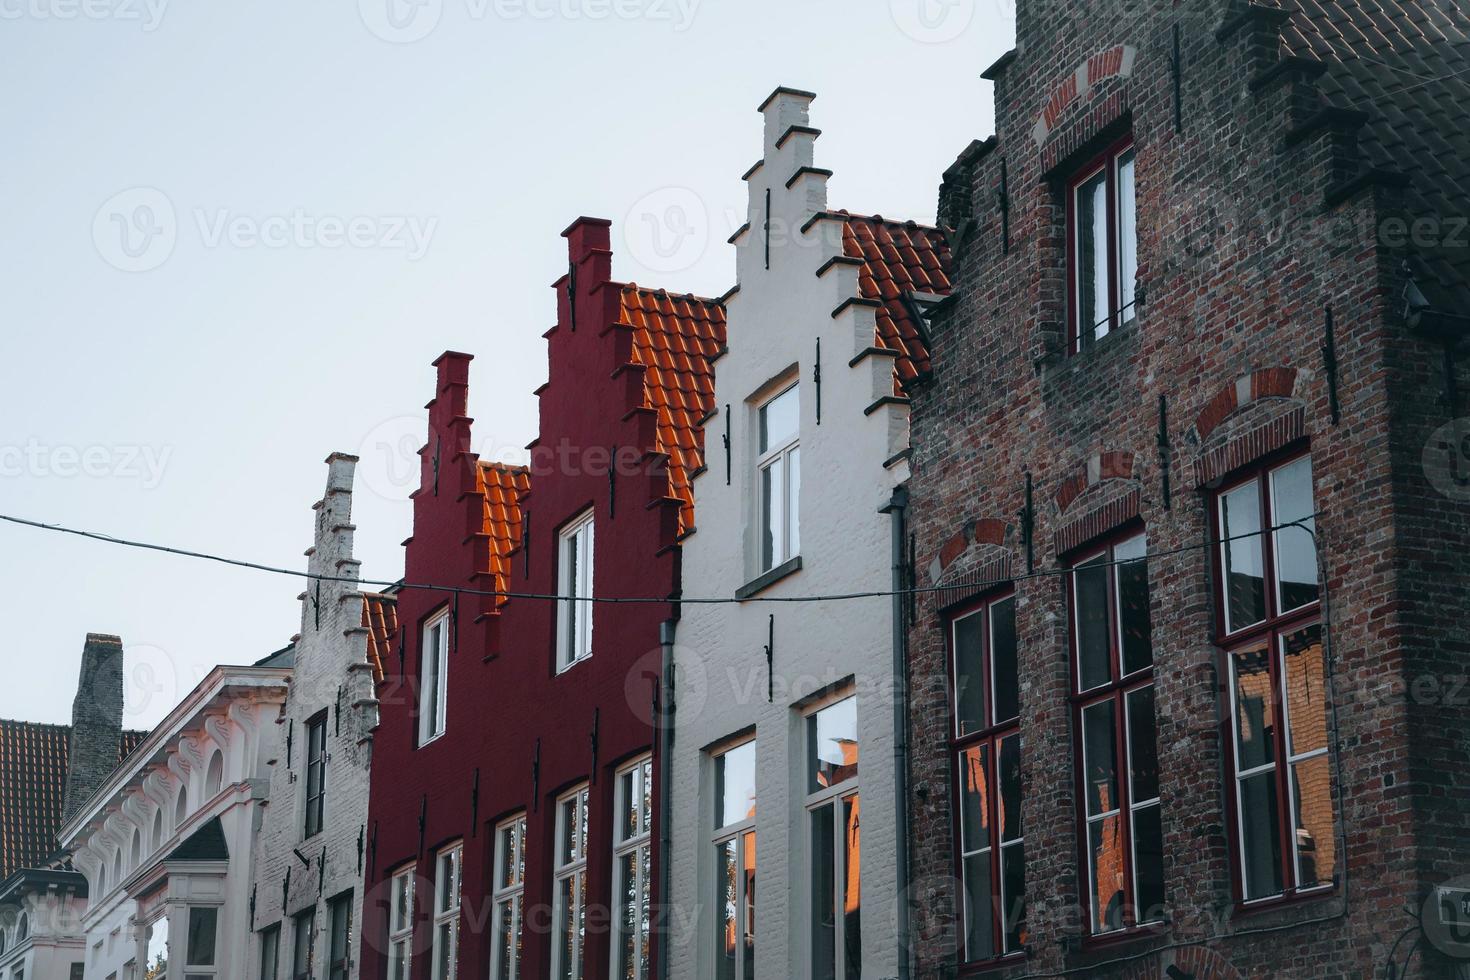 Views from around the town of Bruges, Belgium photo